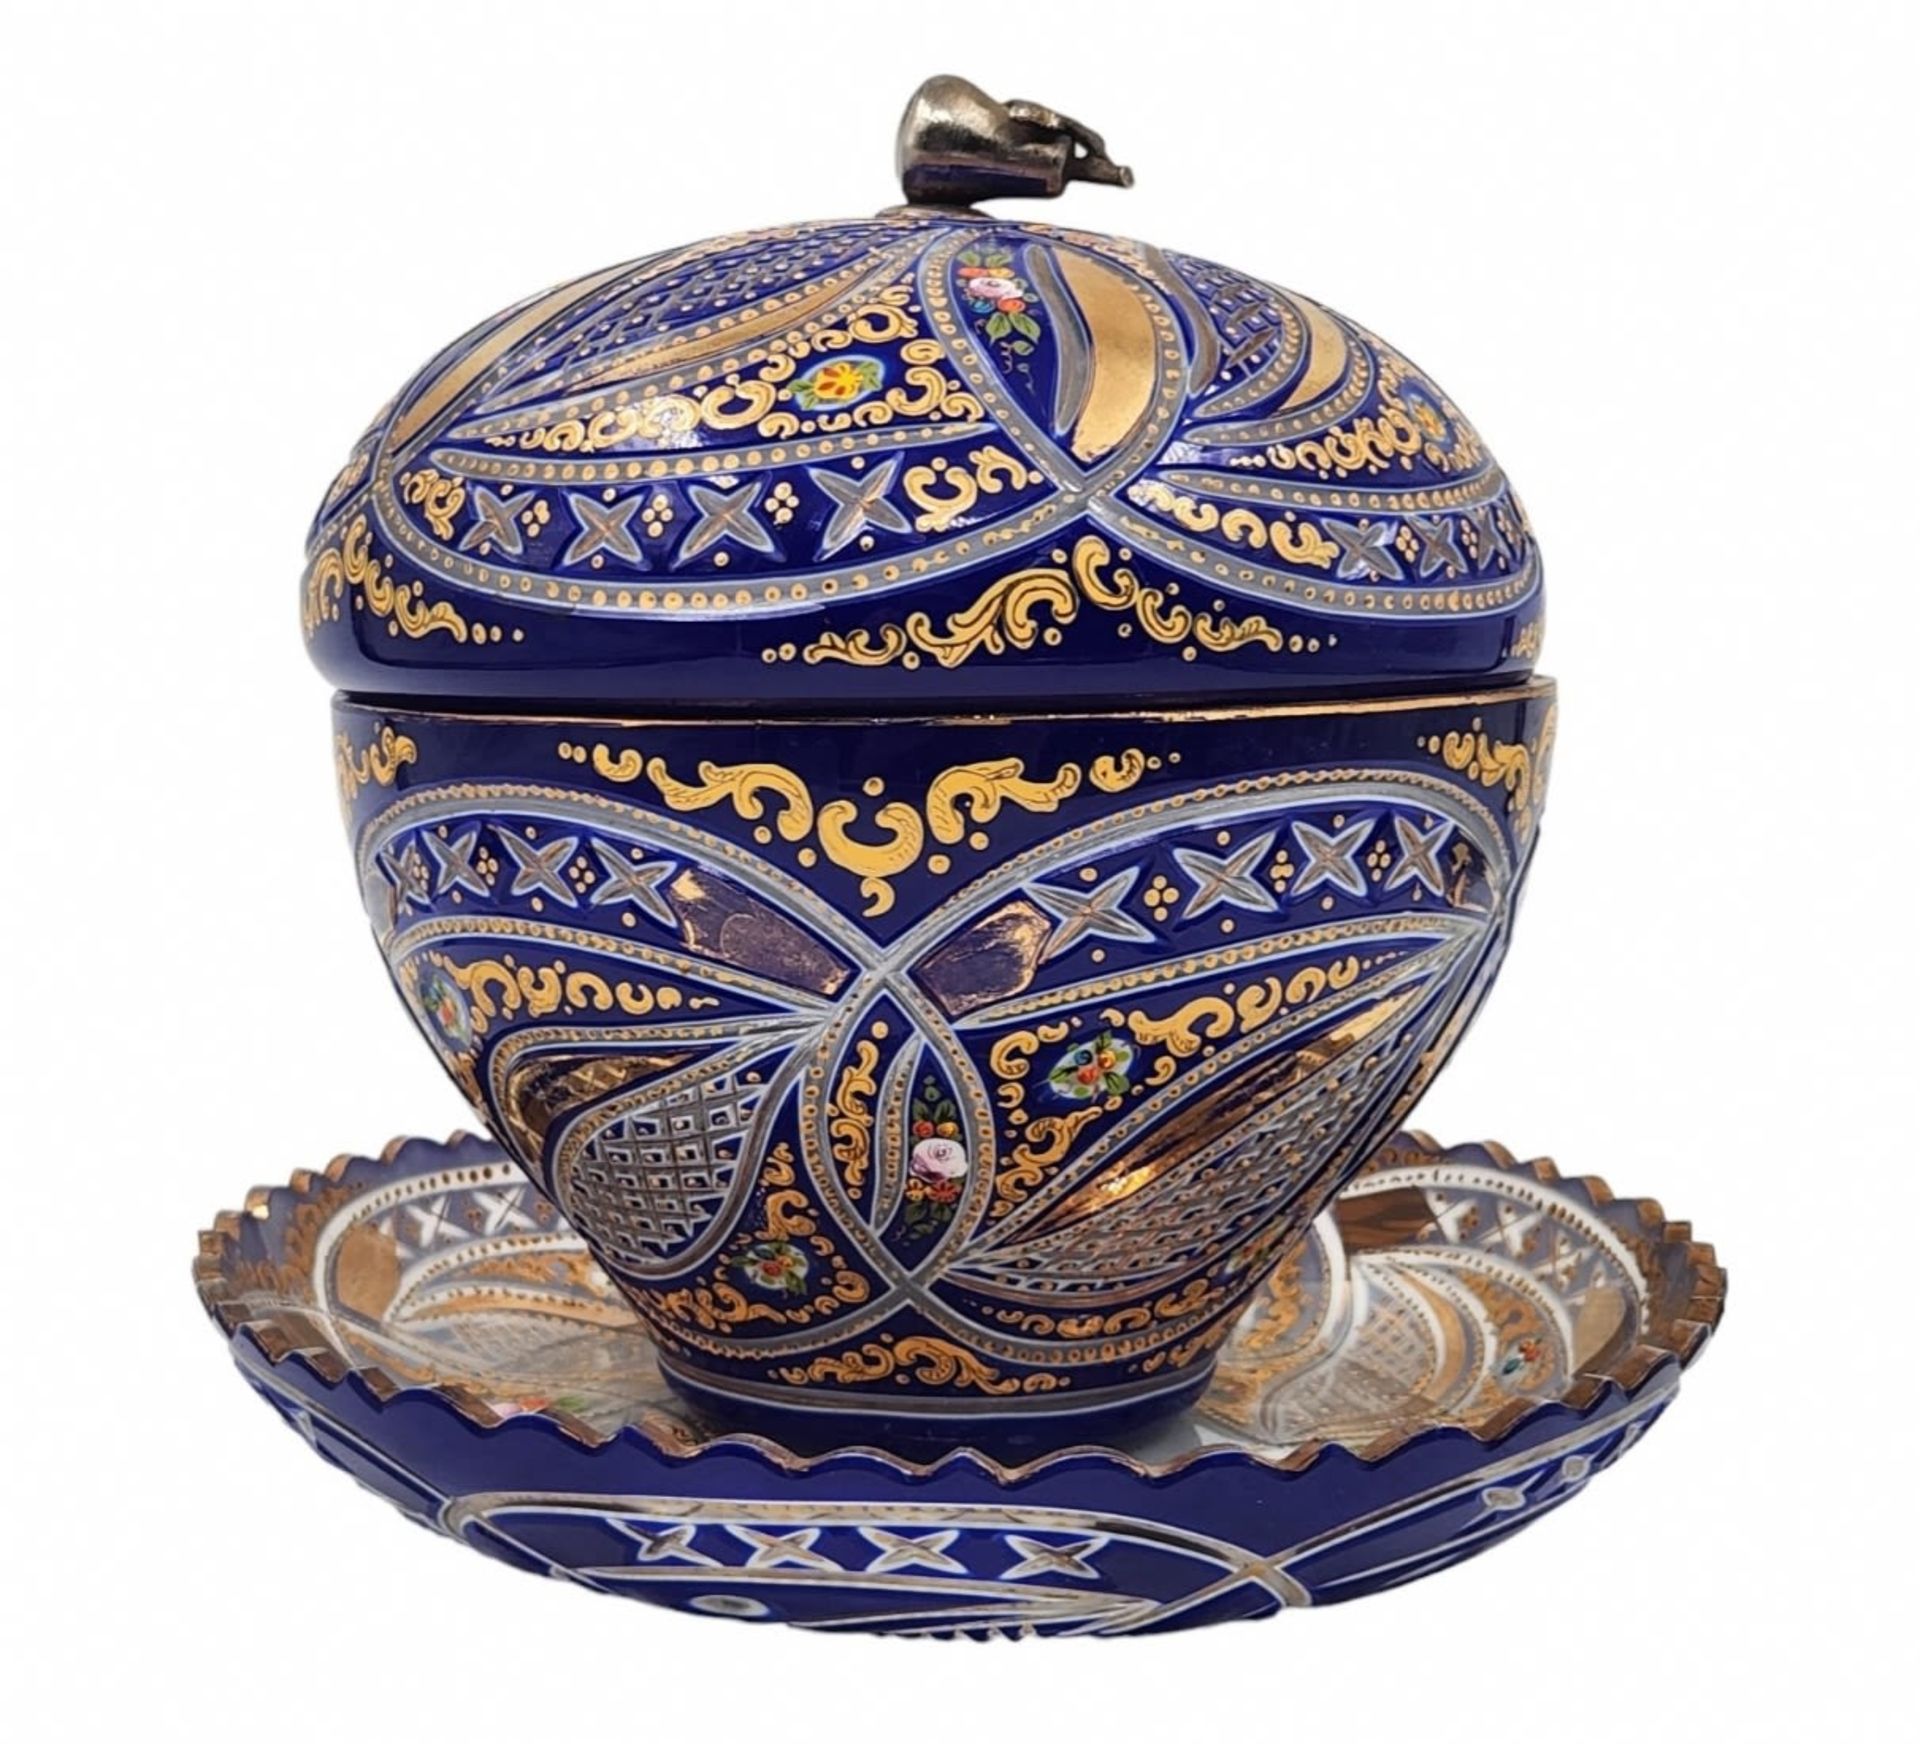 Ancient Bohemian vessel, a very high quality 19th century vessel created for the Ottoman market in - Image 2 of 14